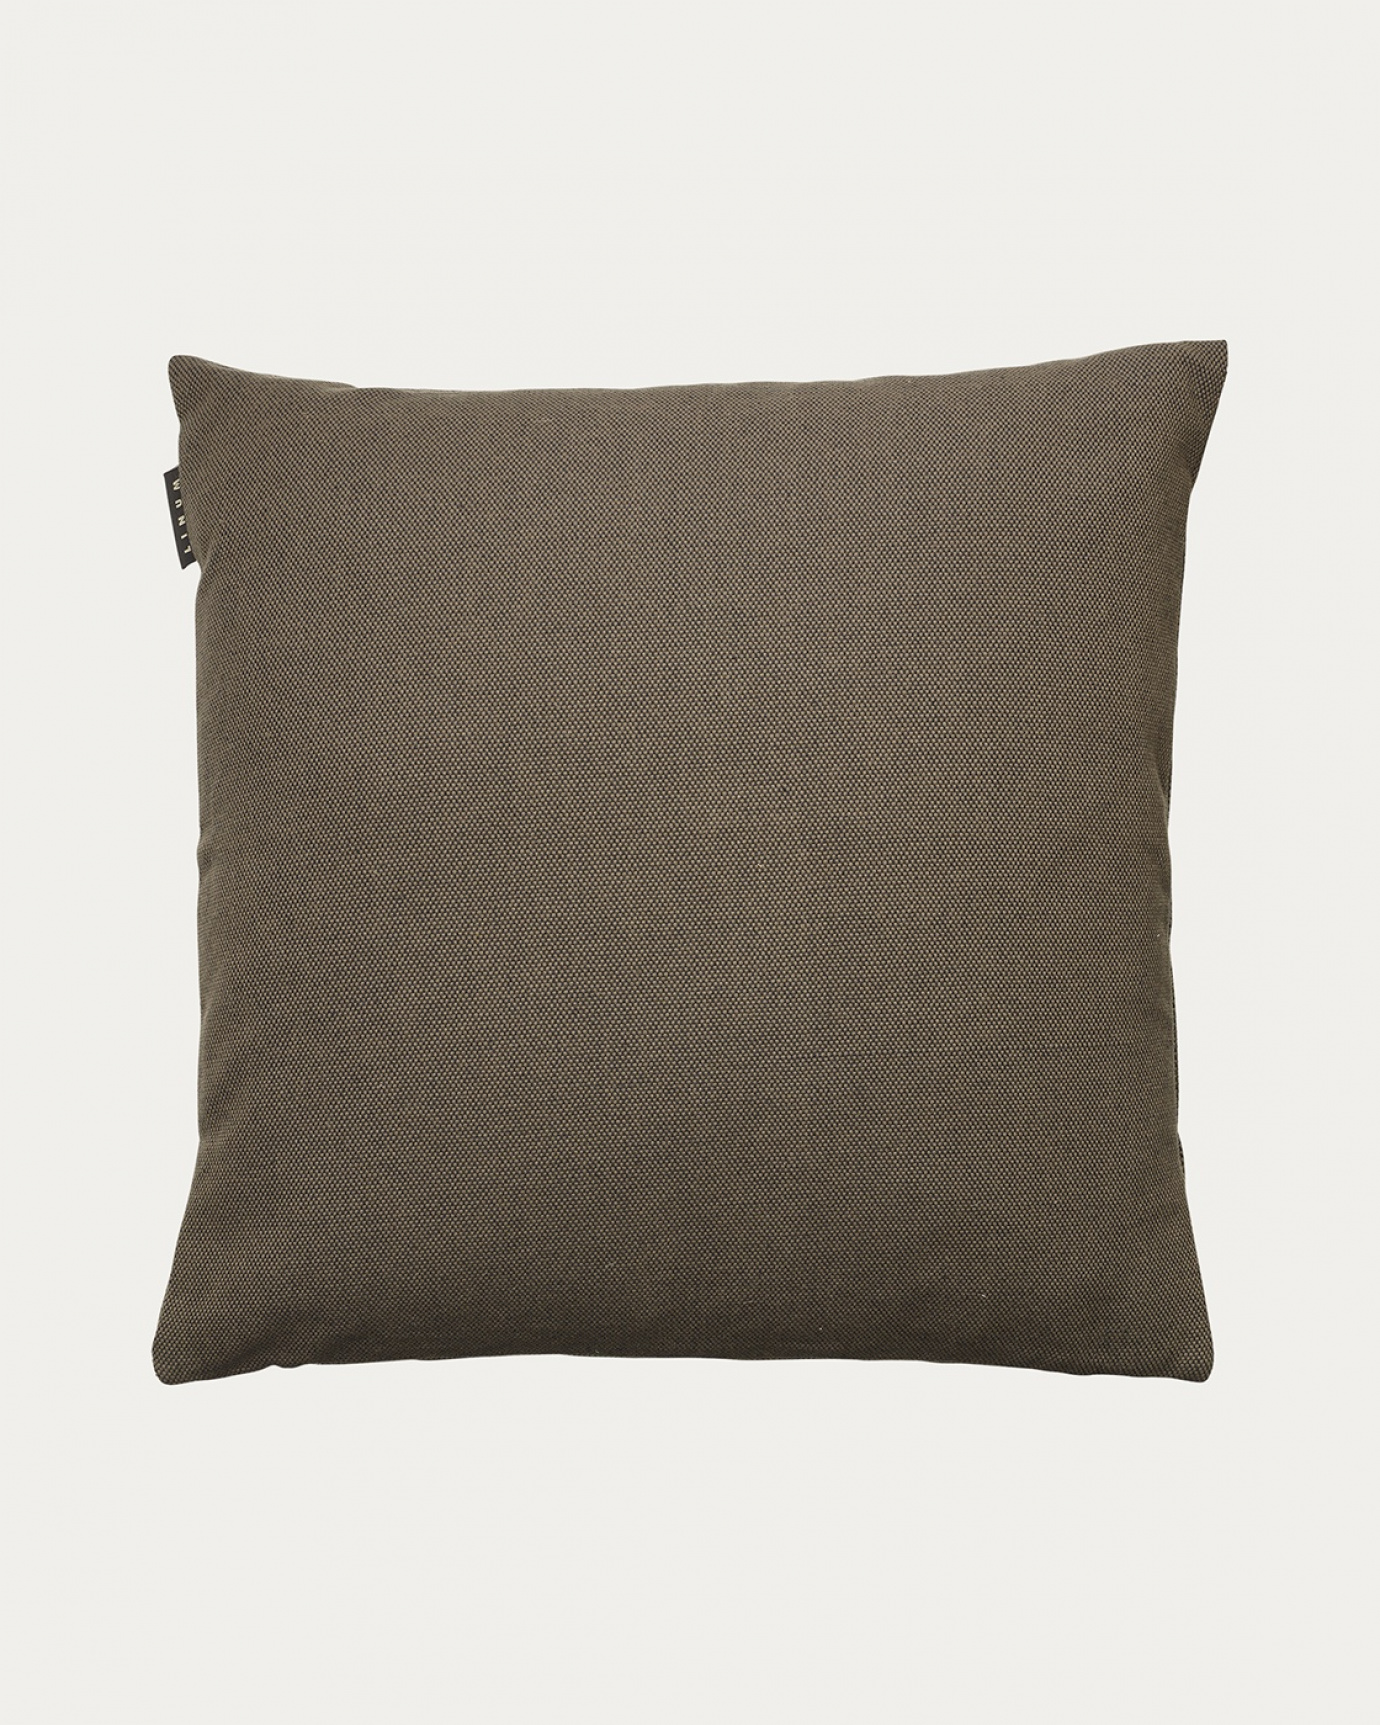 Product image bear brown PEPPER cushion cover made of soft cotton from LINUM DESIGN. Easy to wash and durable for generations. Size 50x50 cm.